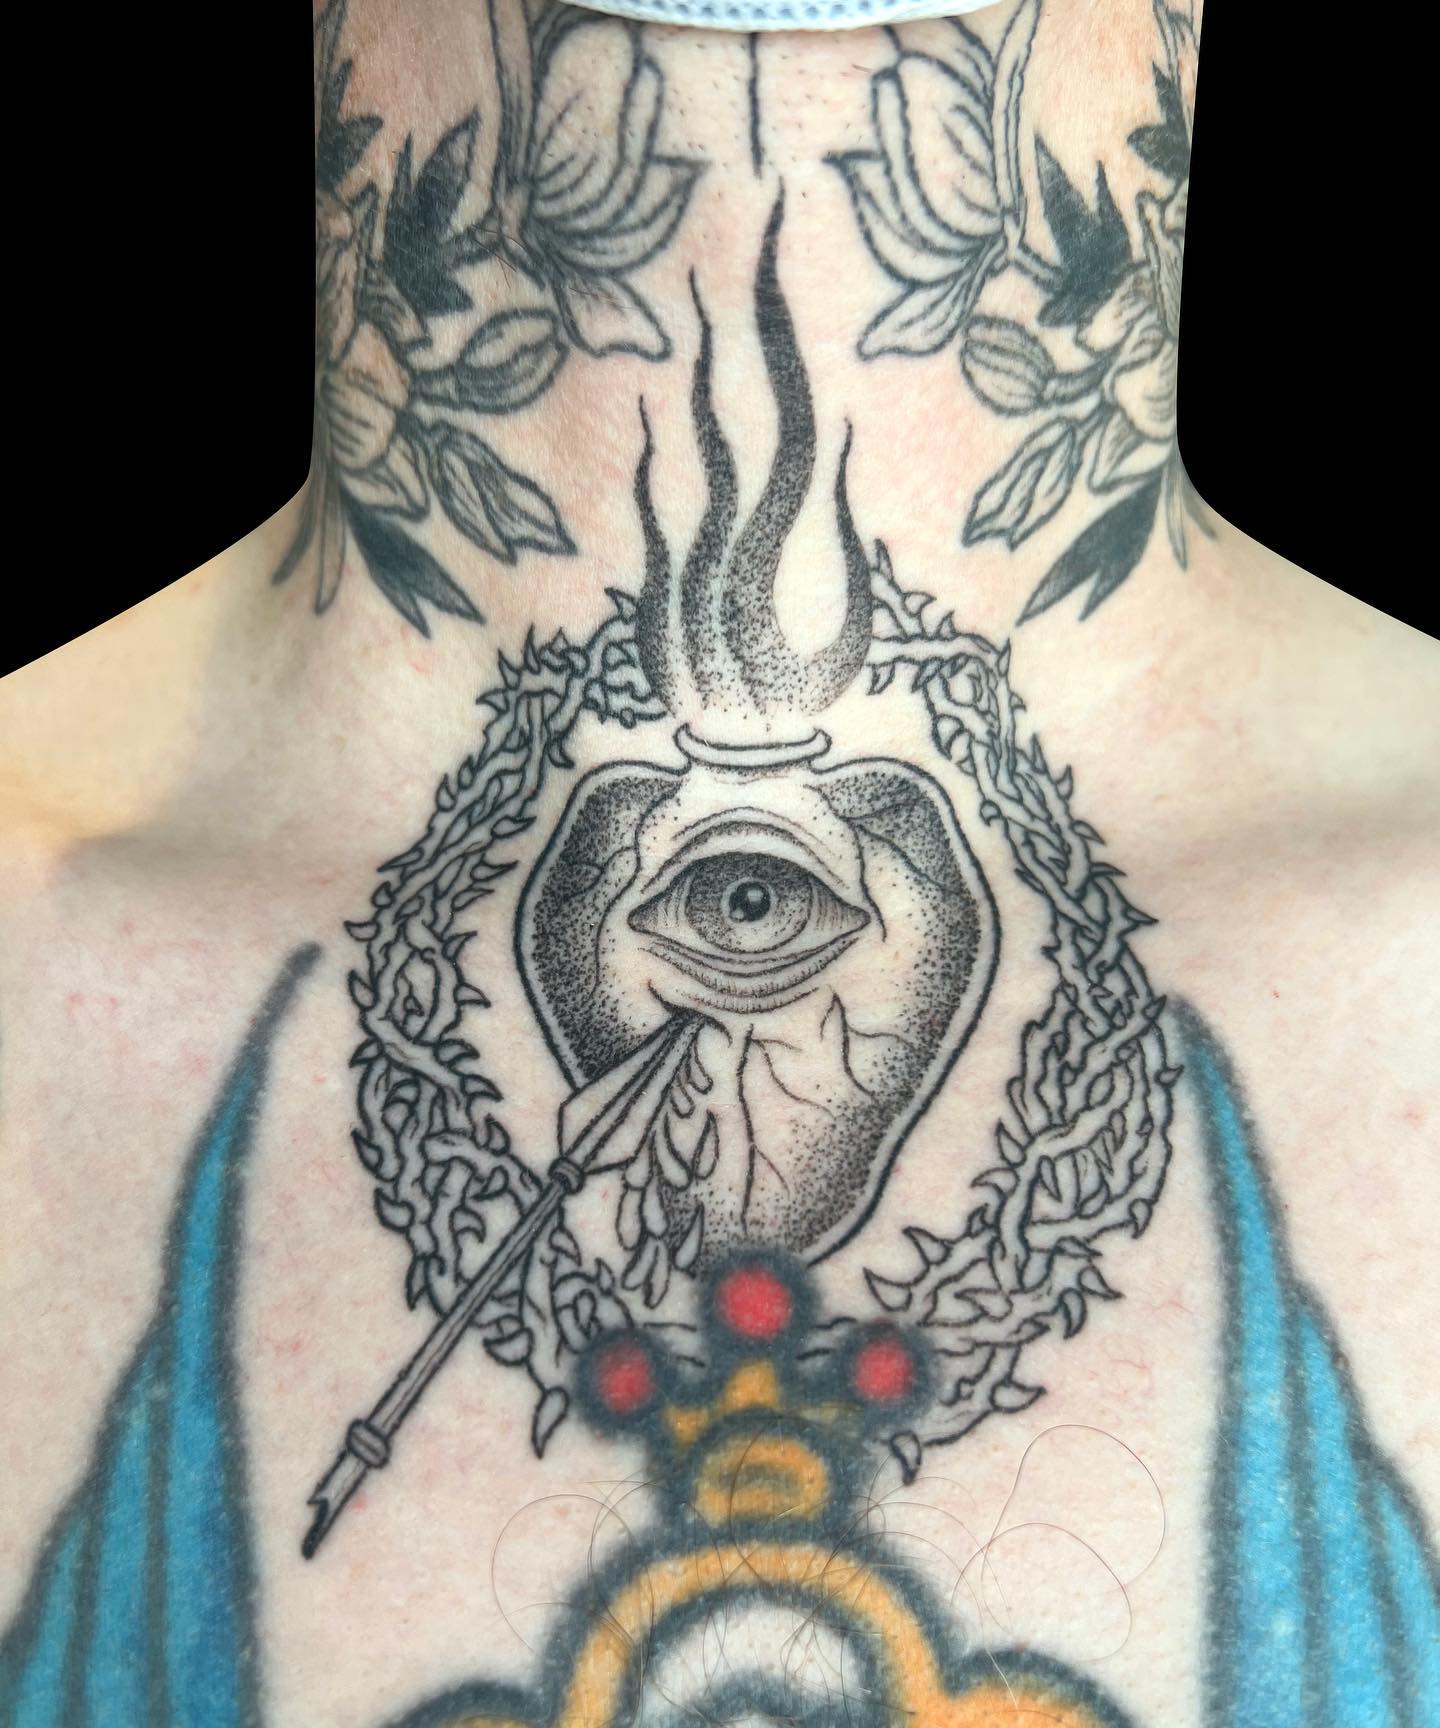 Here is an ablazed vase with a single eye, which is fractured by a spear. It's a very interesting tattoo and the meaning of it can change from person to person. For us, it represents patience and toleration.